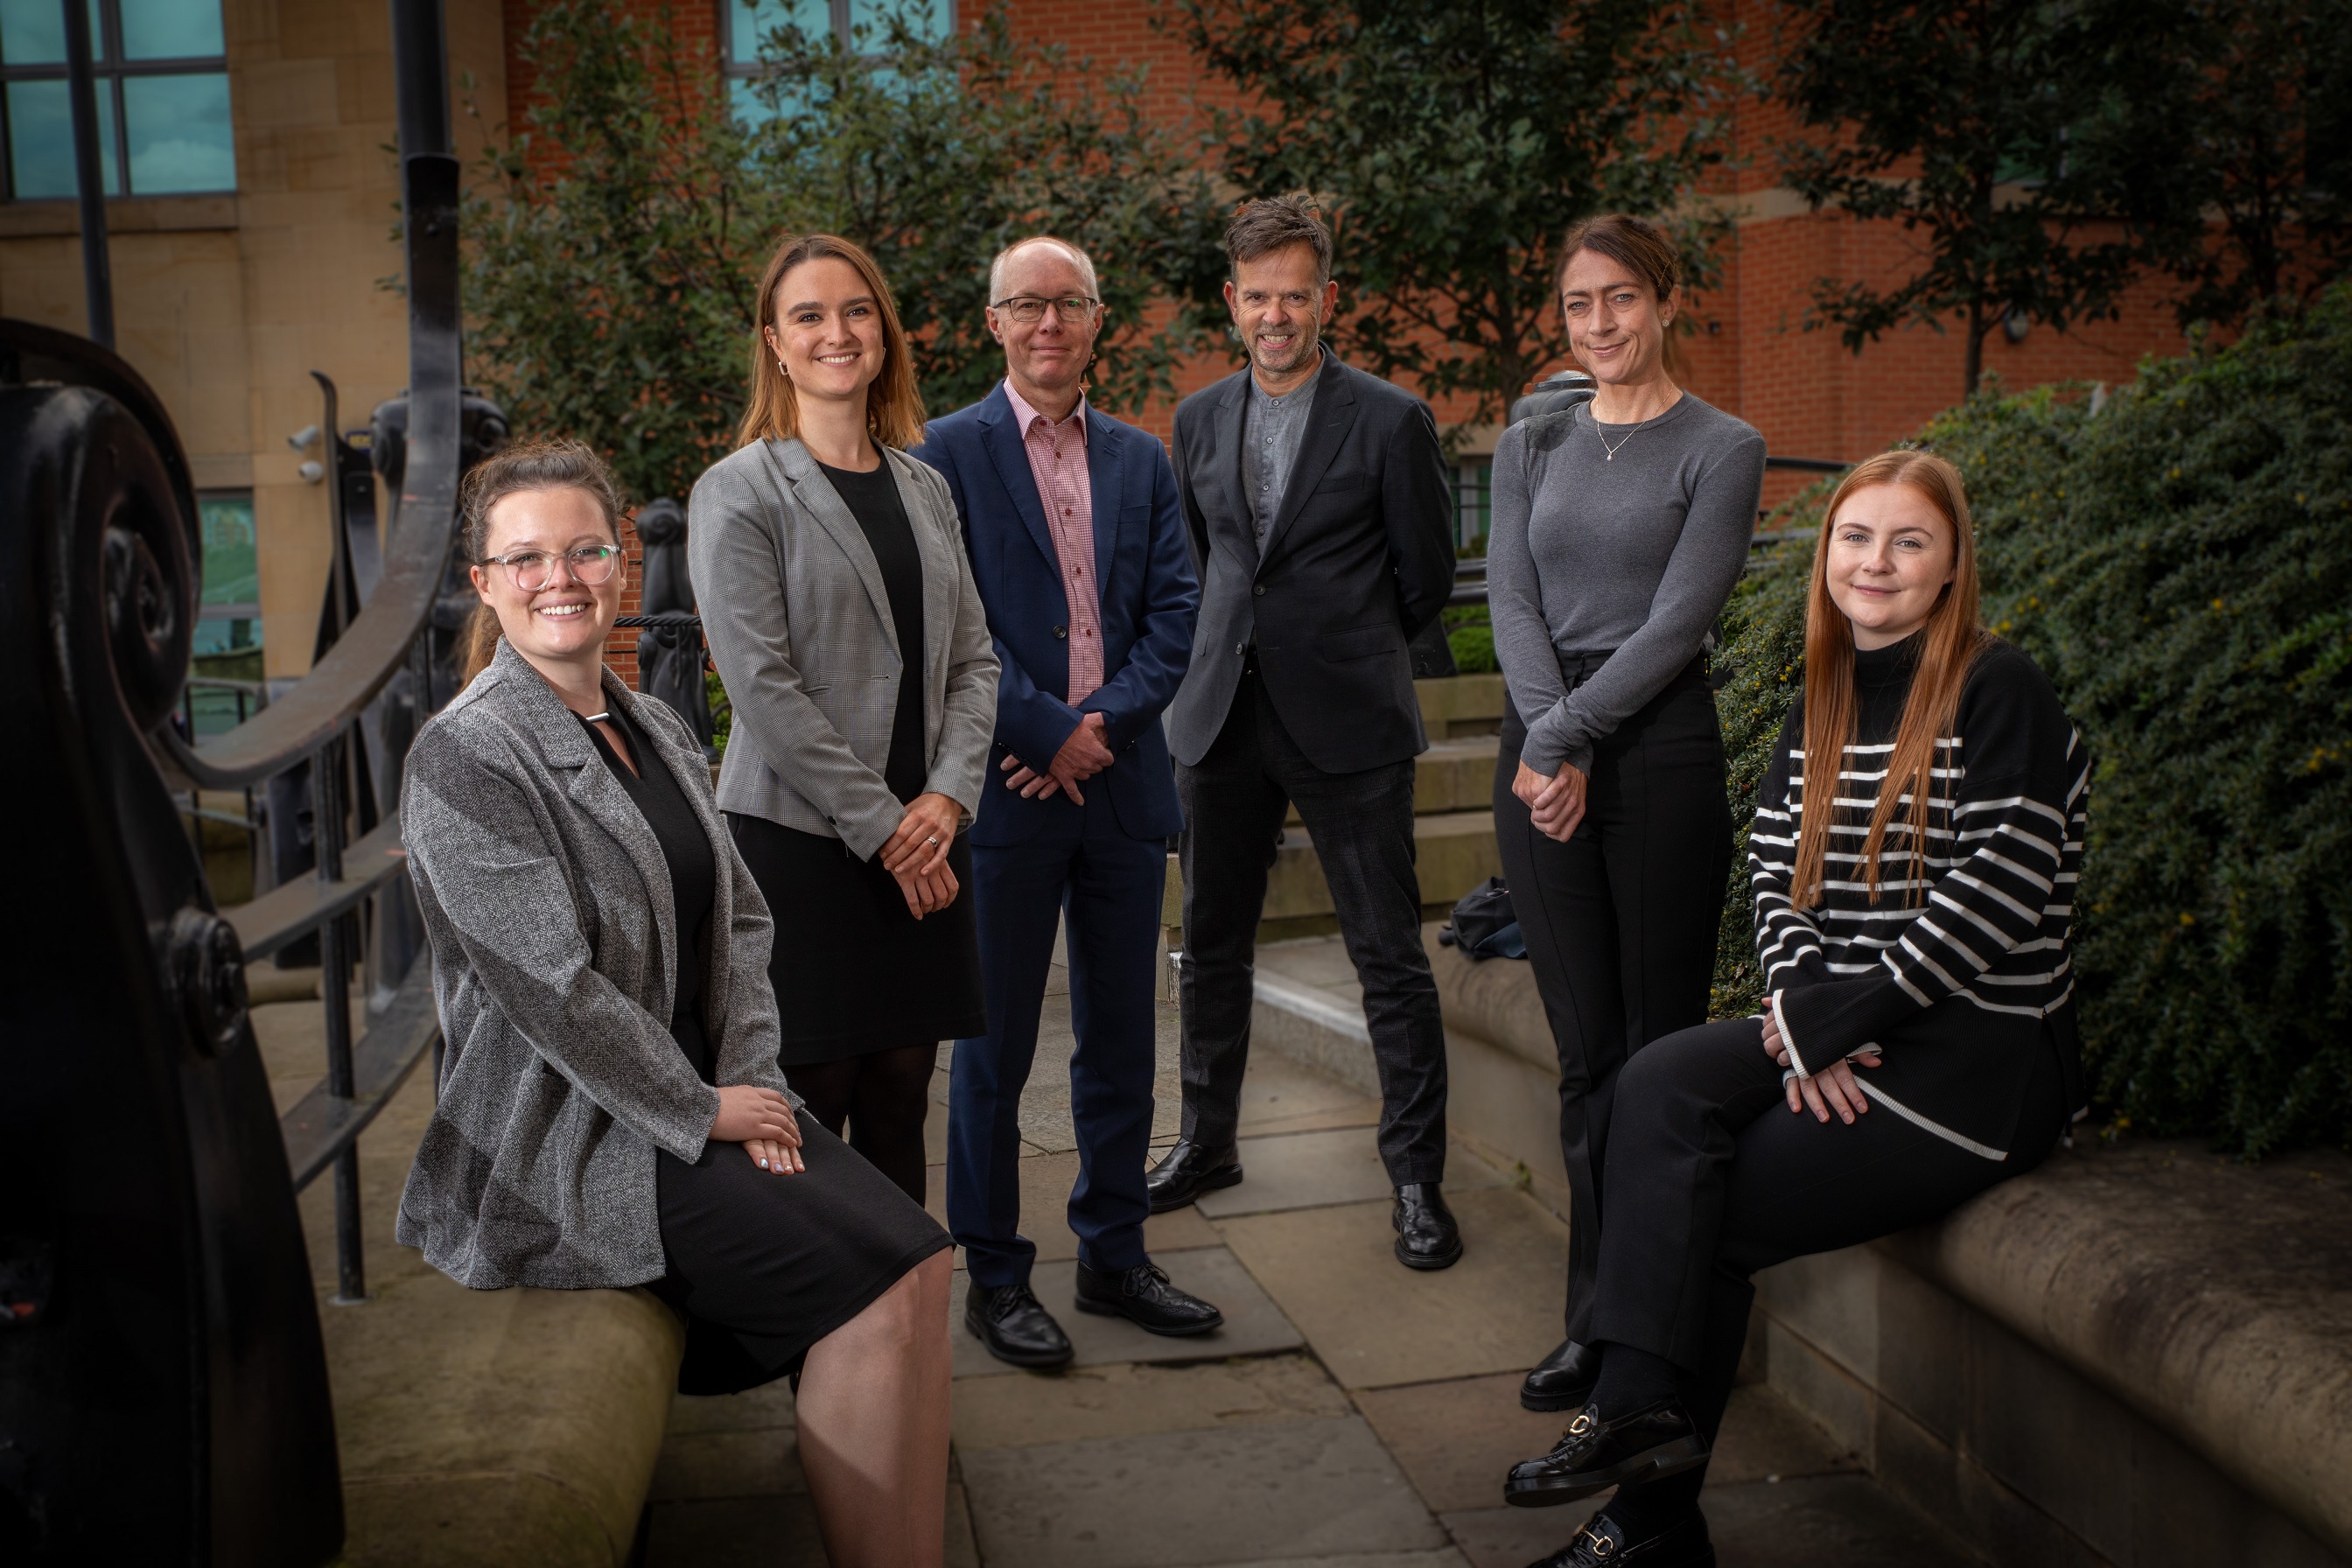 Ward Hadaway’s social housing team in the North East smiling at the camera. Pictured left to right are: Tyla, Naoise, Robert, John, Julia and Chloe.